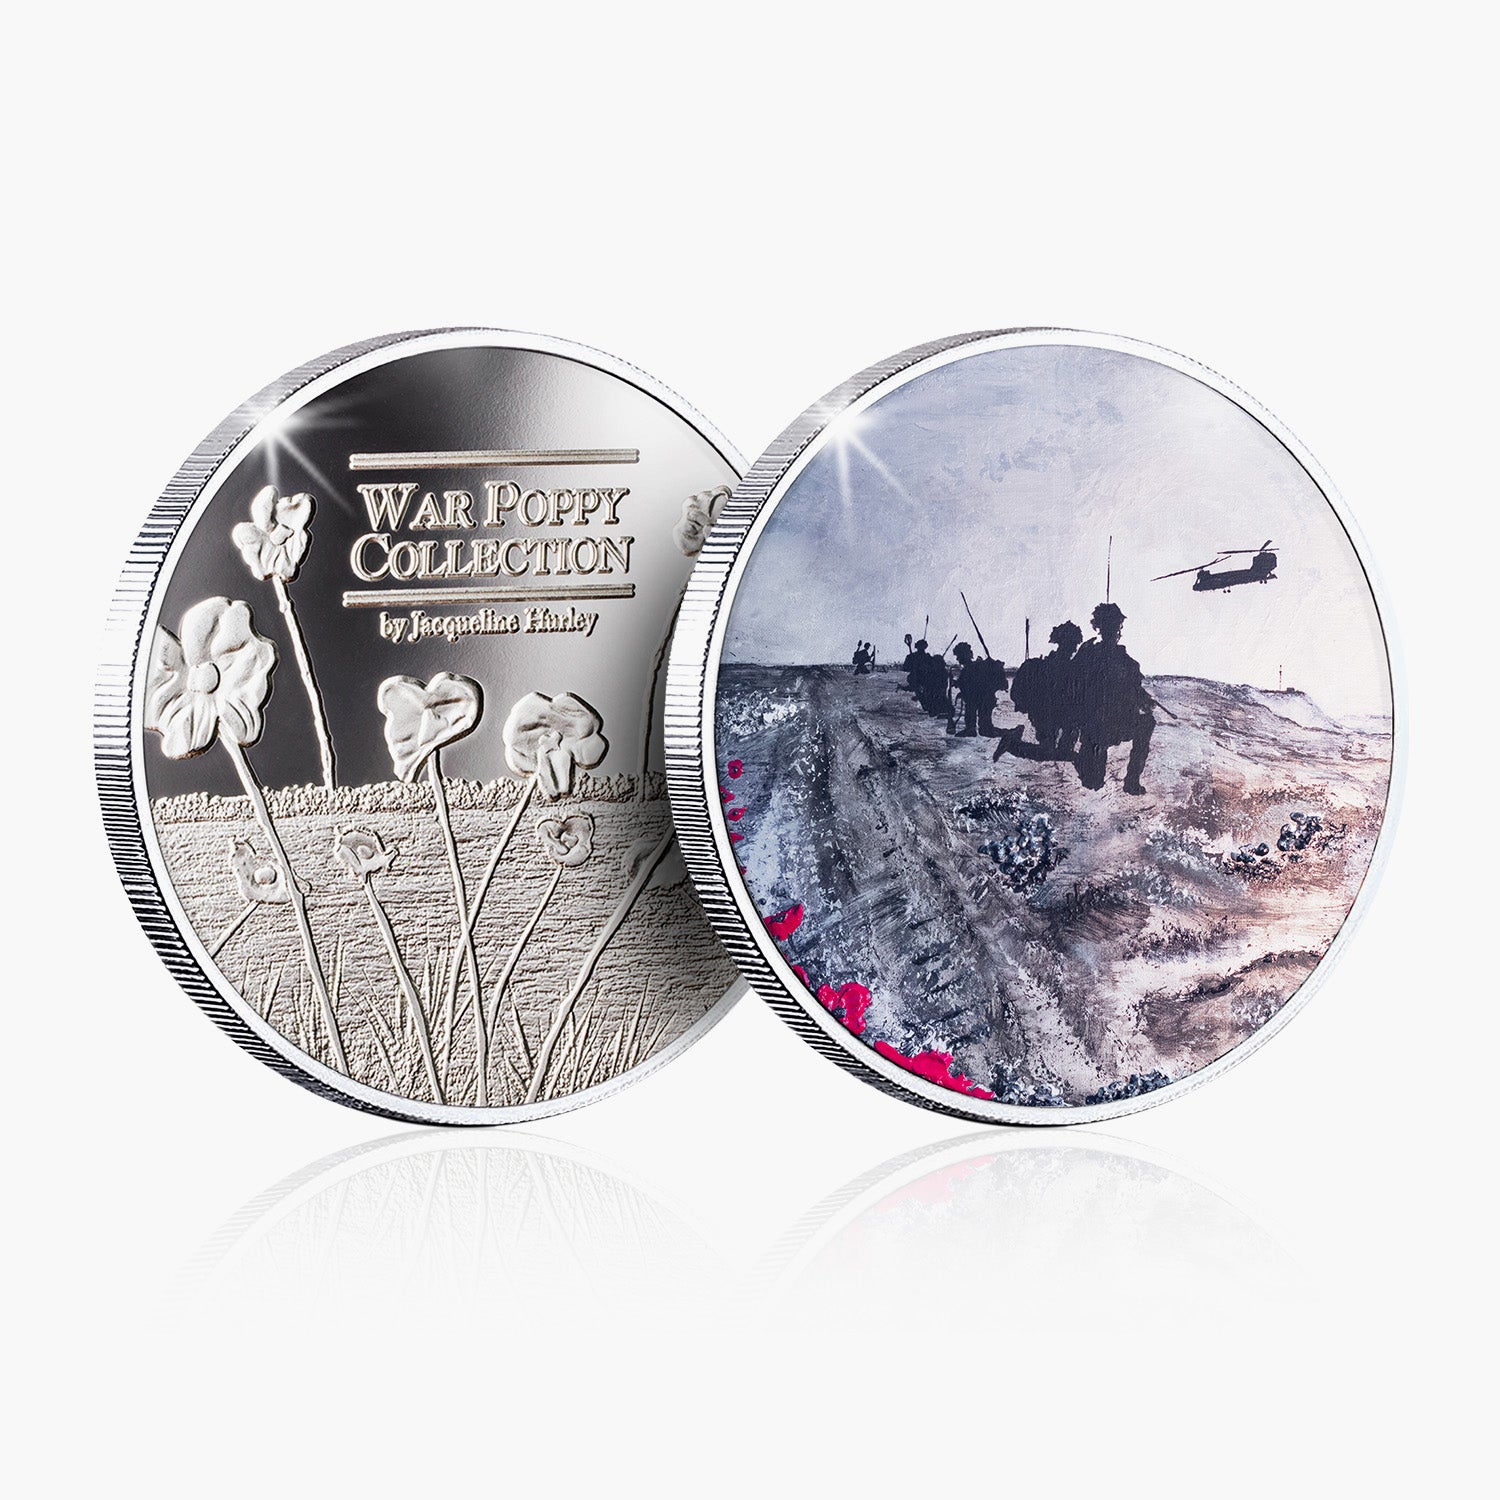 Medic On The Mountain Silver-Plated Commemorative